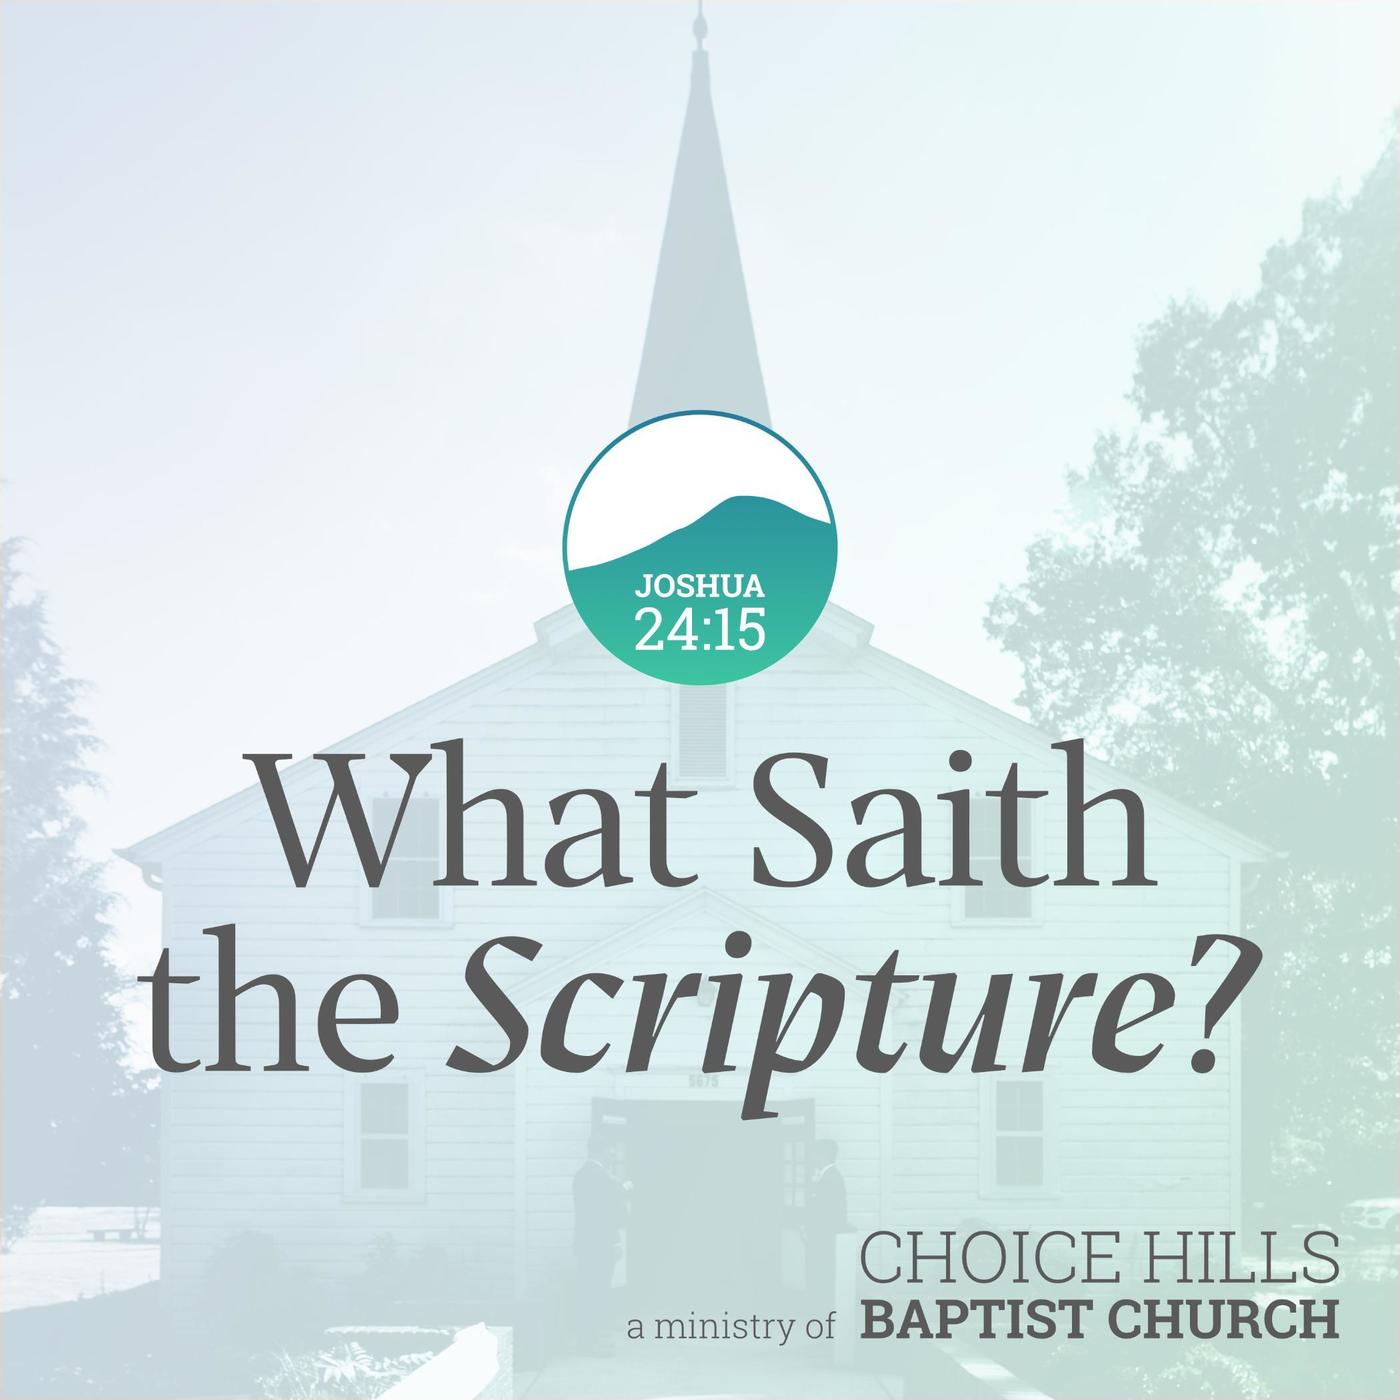 Adult Sunday School: Study of the 119th Psalm (Part 6)